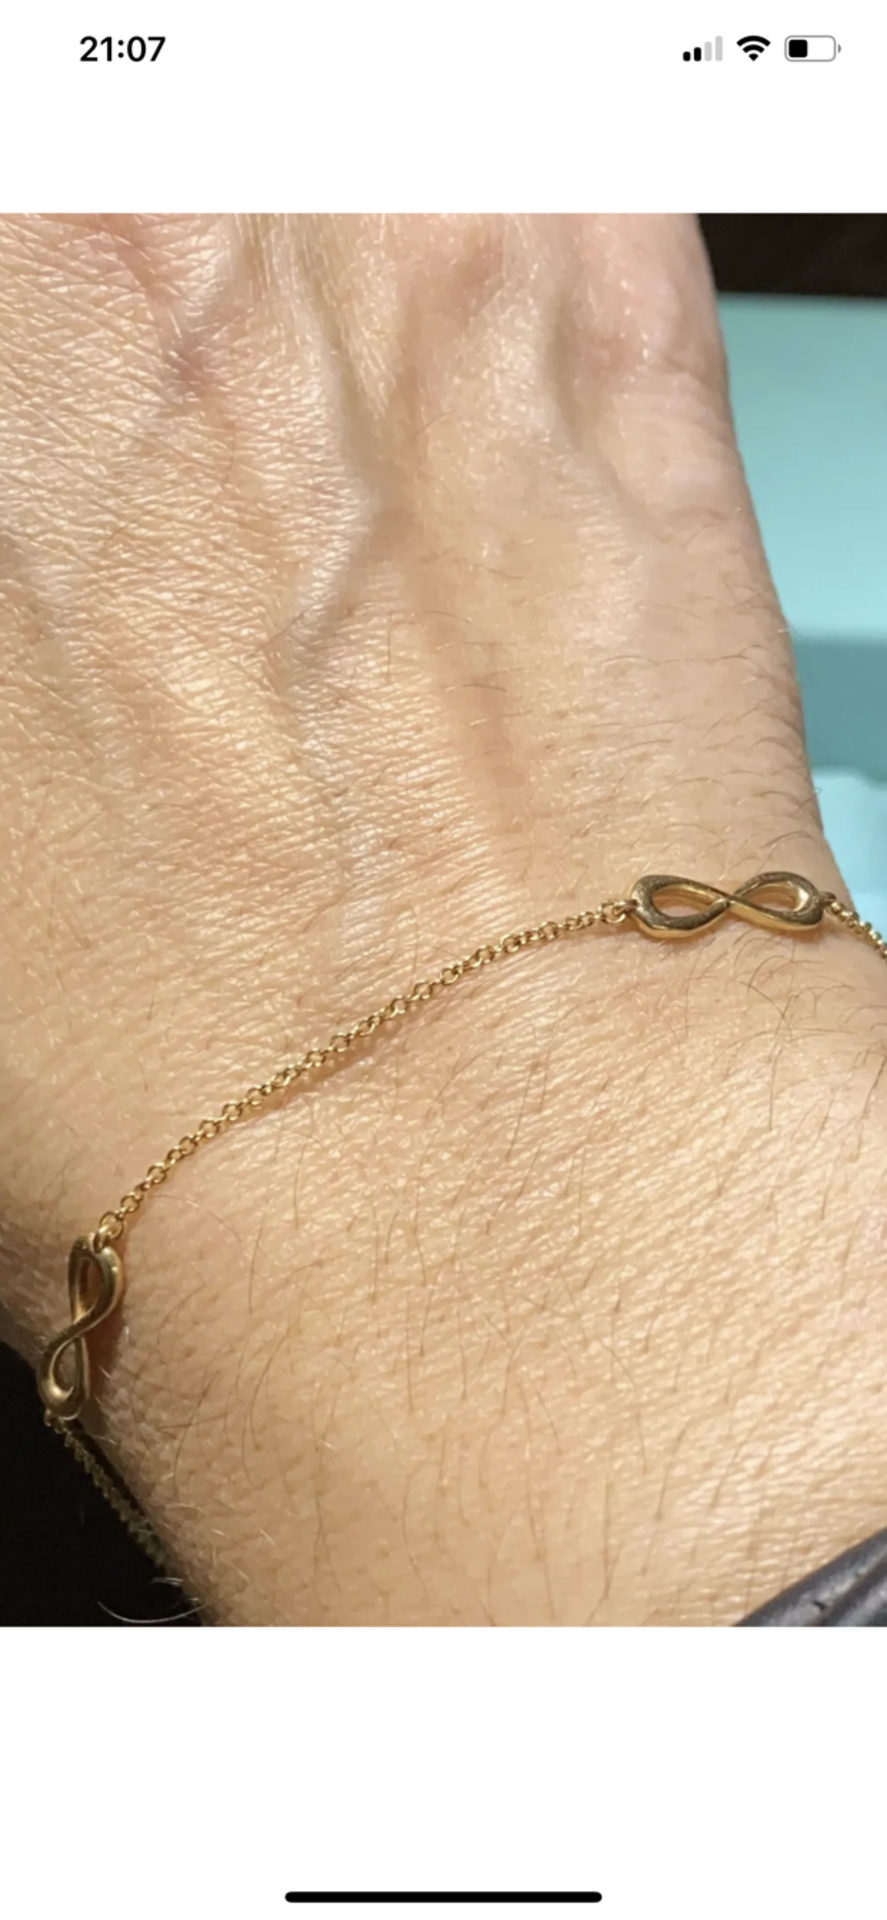 TIFFANY & CO 18ct YELLOW GOLD ENDLESS INFINITY BRACELET - Image 2 of 3